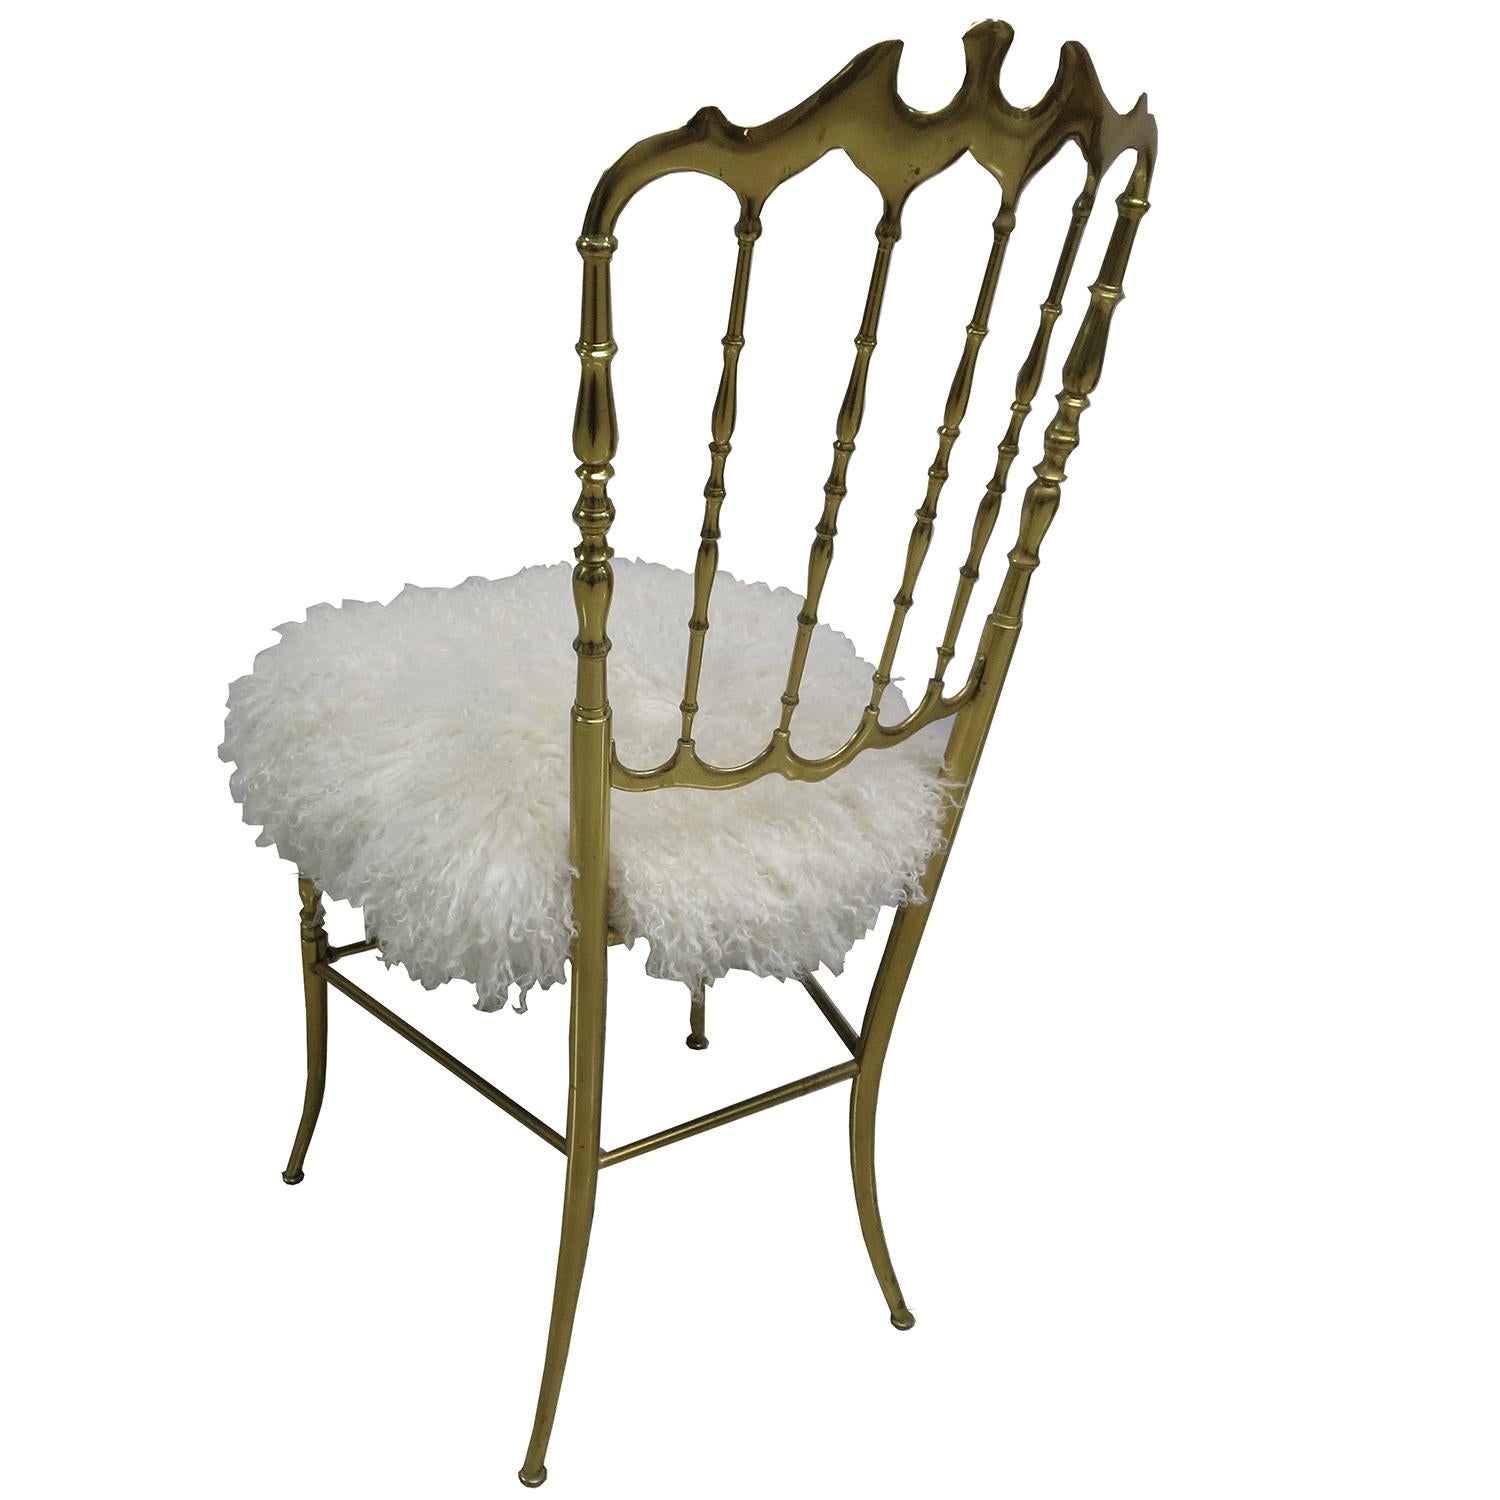 This beautiful polished brass chair was created by Chiavari of Italy in the 1970s. We have covered the seat in a super soft luxurious long haired sheeps wool, and it looks fantastic! Perfect for a bedroom, dressing room, or anyplace an interesting